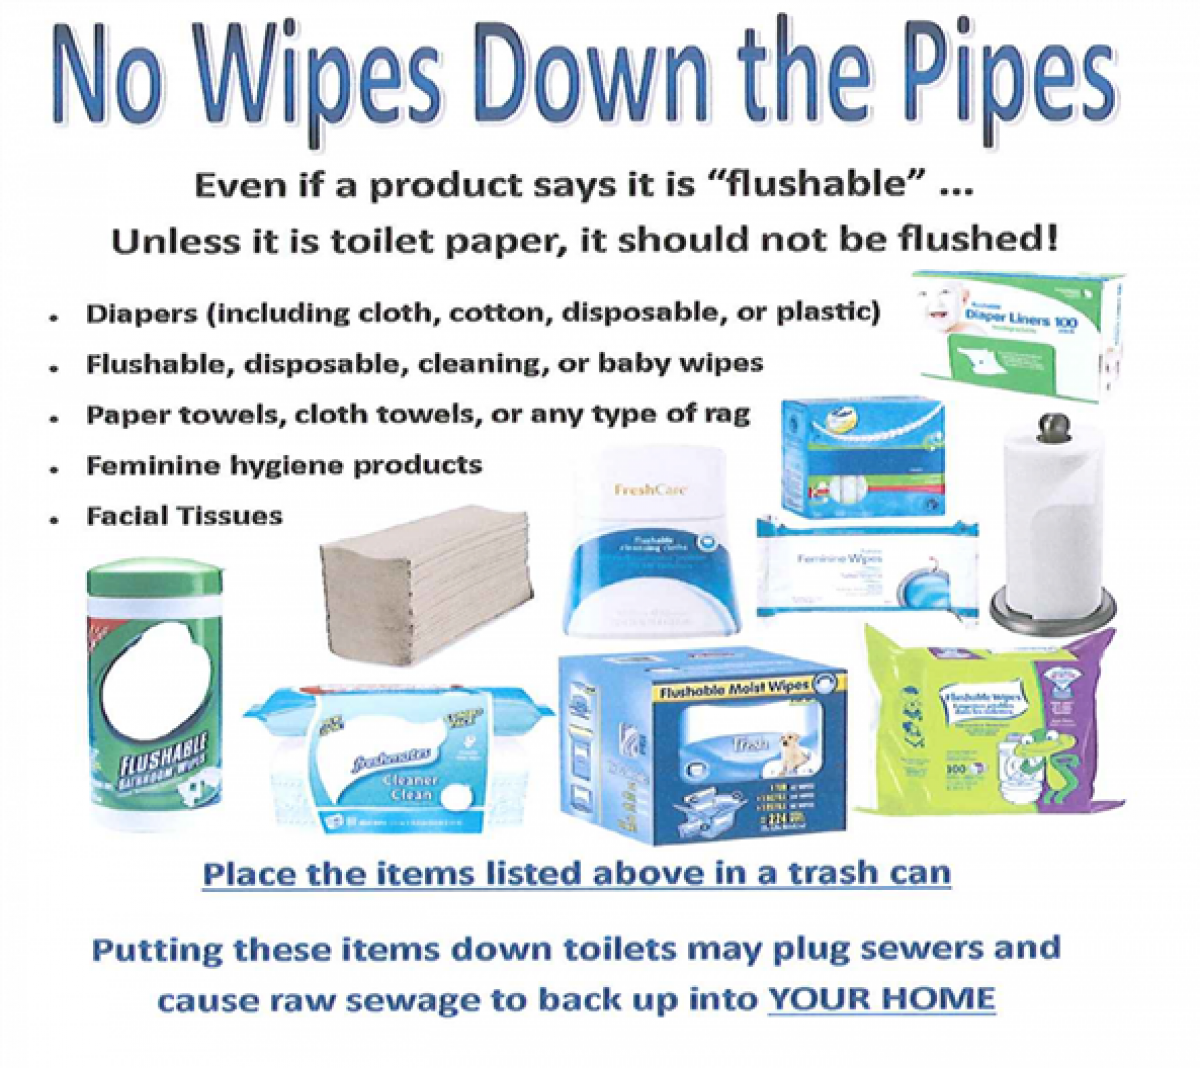 No Wipes in the Pipes